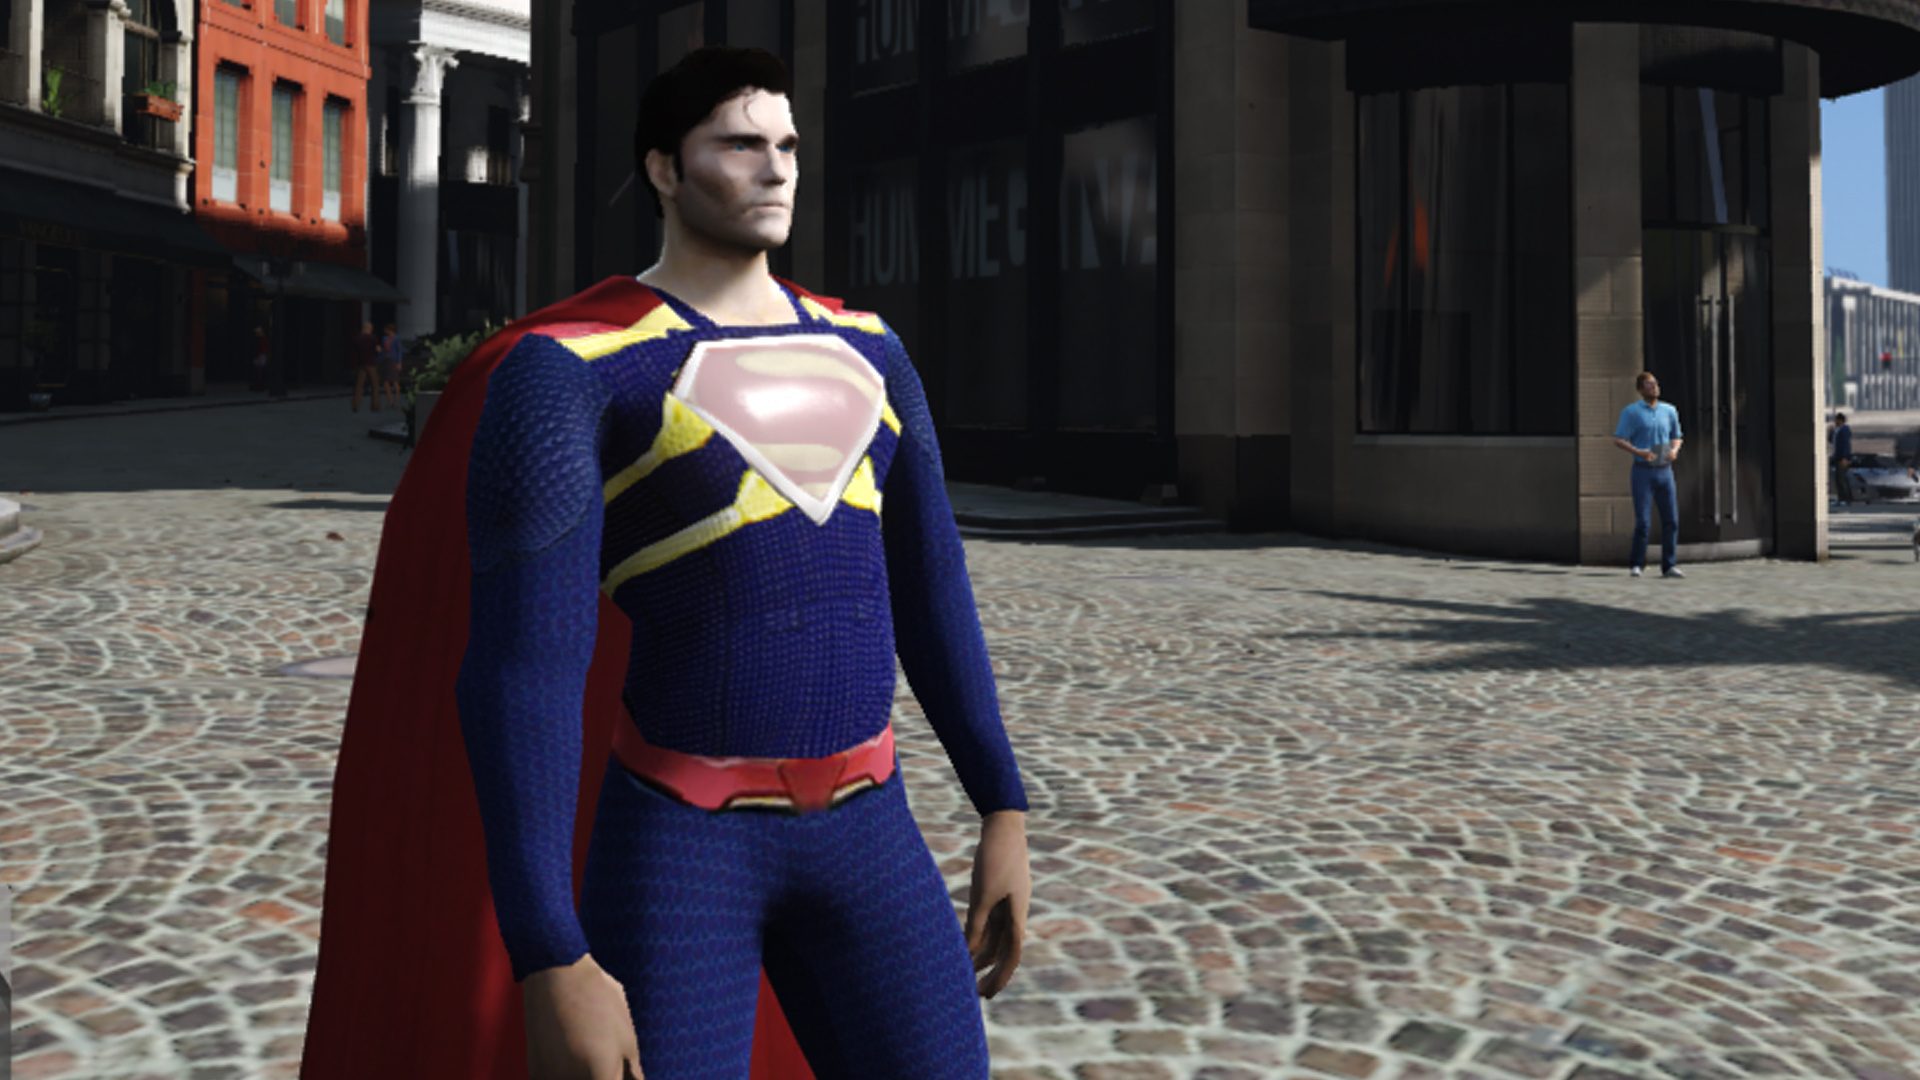 download gta 5 superman mod apk for android